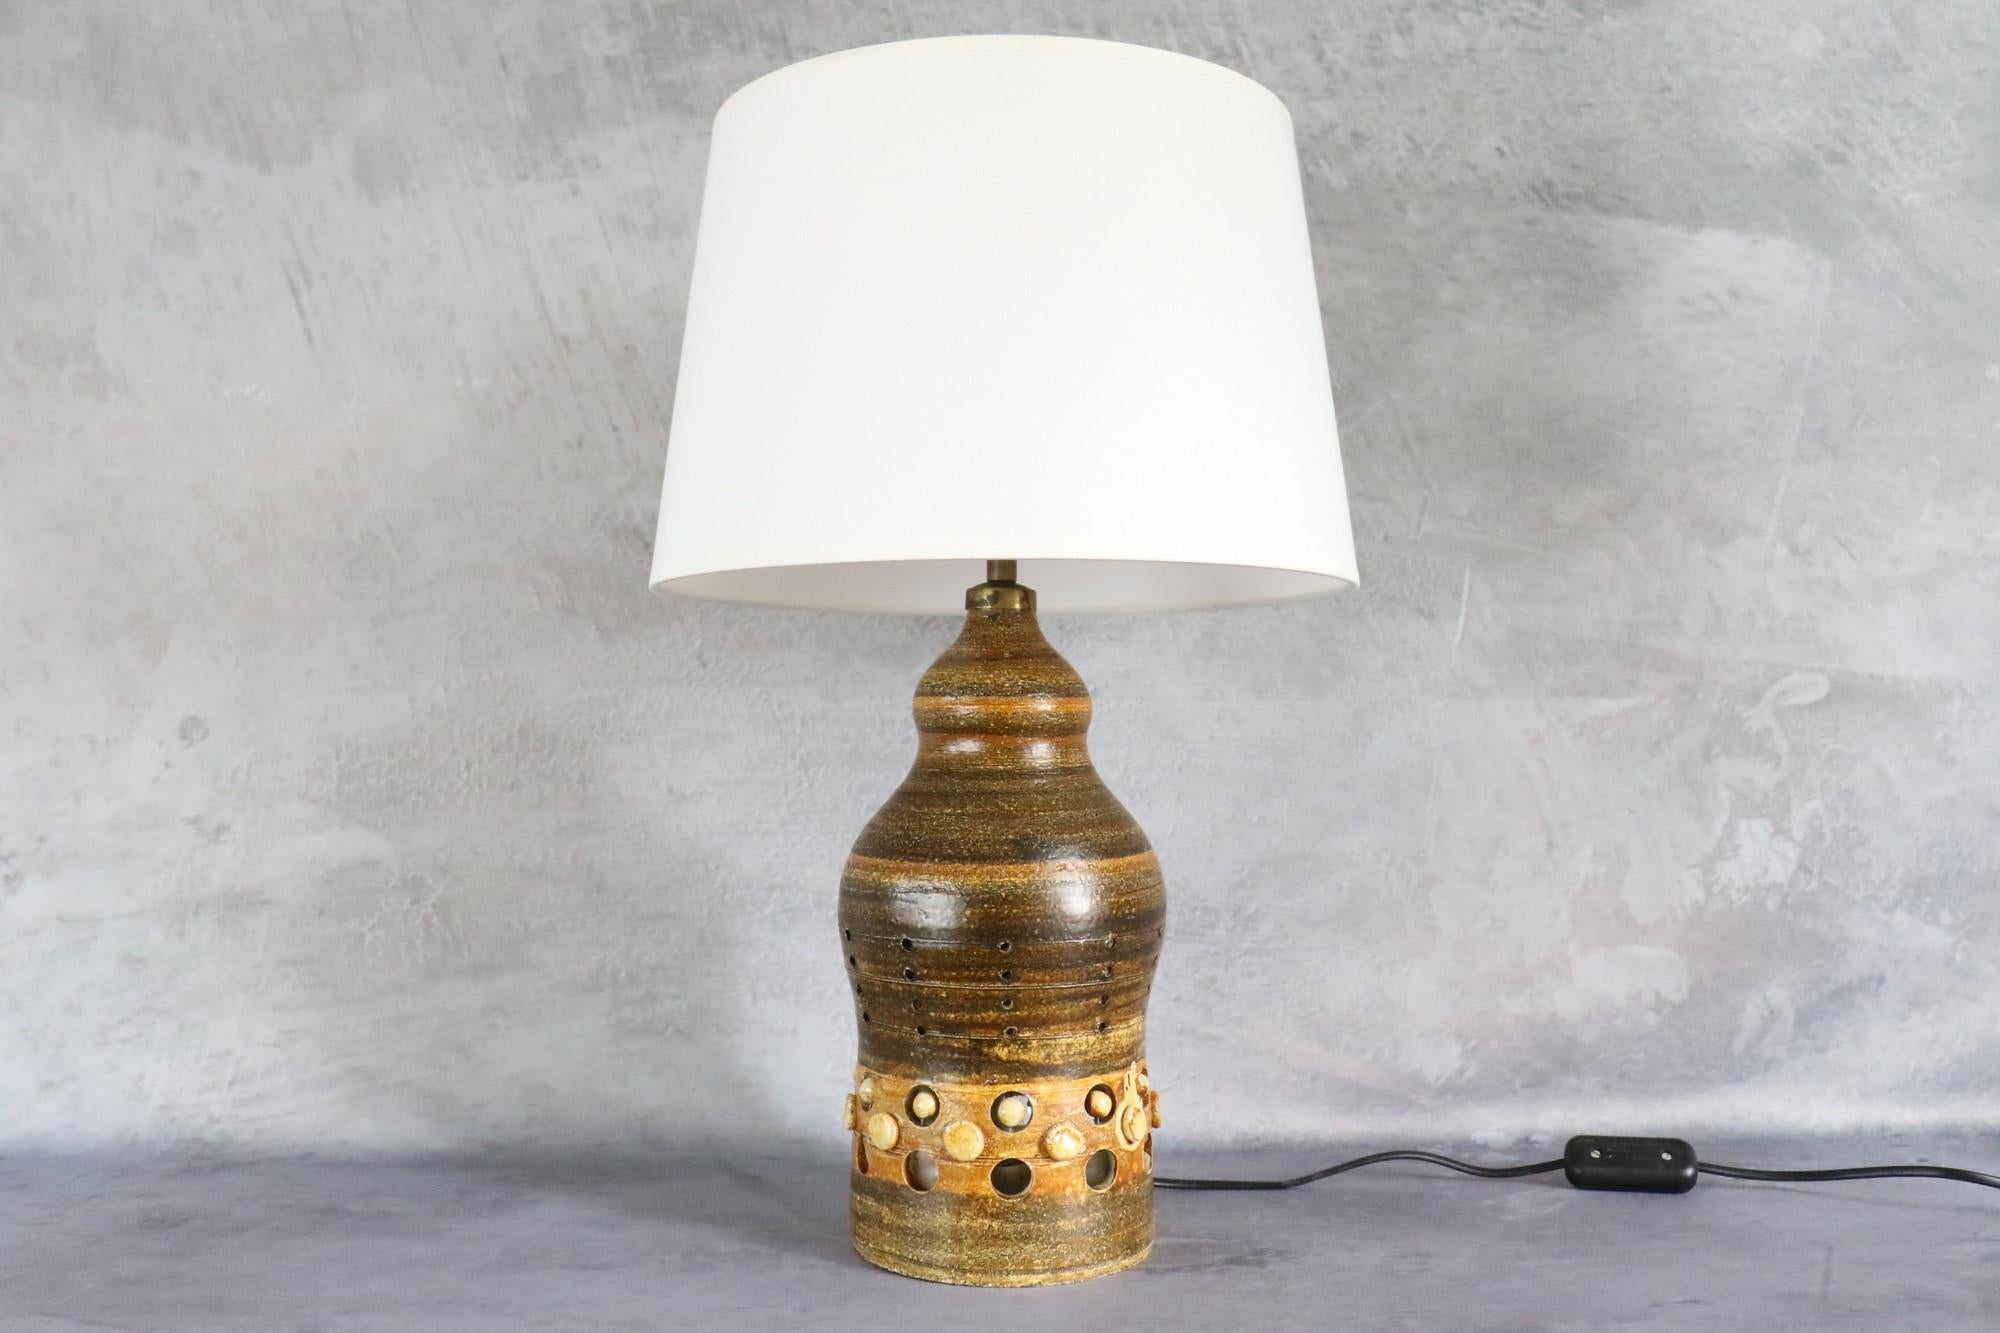 Mid-Century Modern Double Lighting French Ceramic Lamp by Georges Pelletier, 1970s For Sale